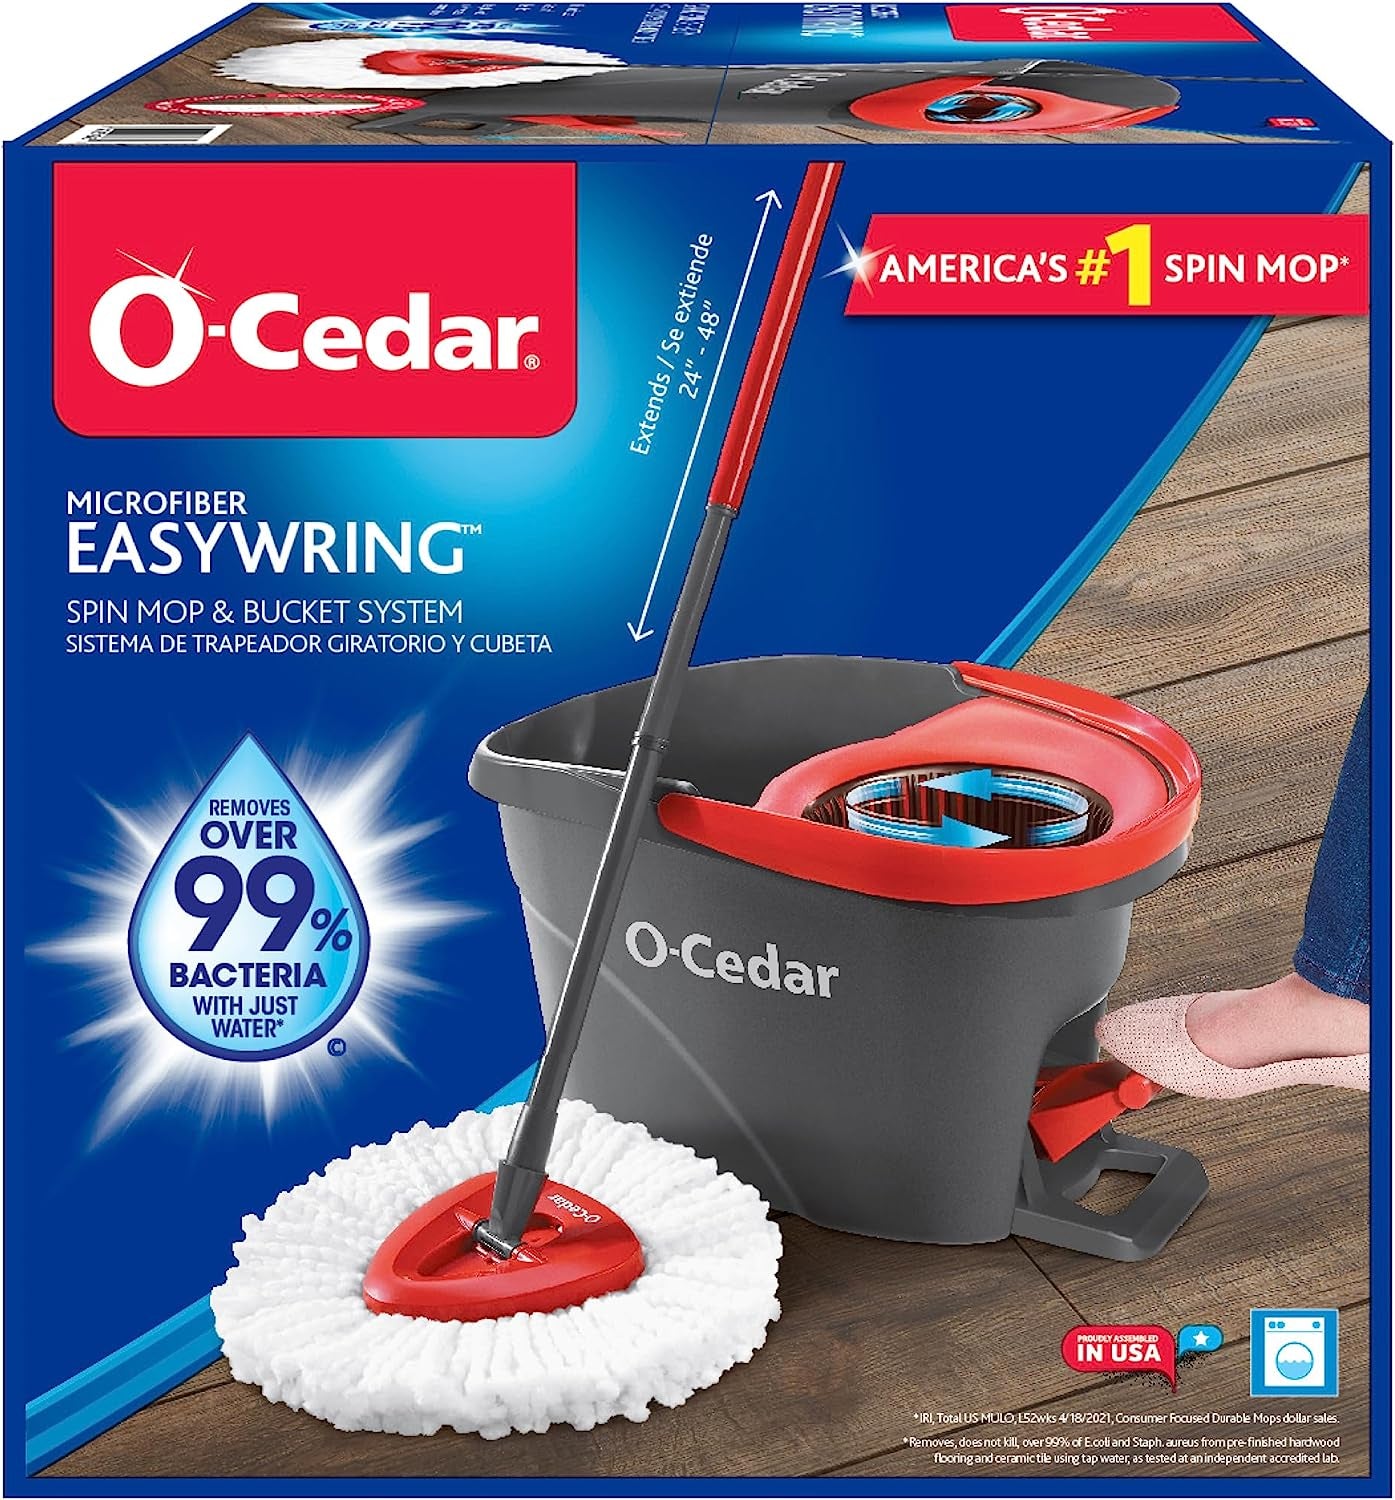 O-Cedar Easywring Microfiber Spin Mop, Bucket Floor Cleaning System, Red, Gray